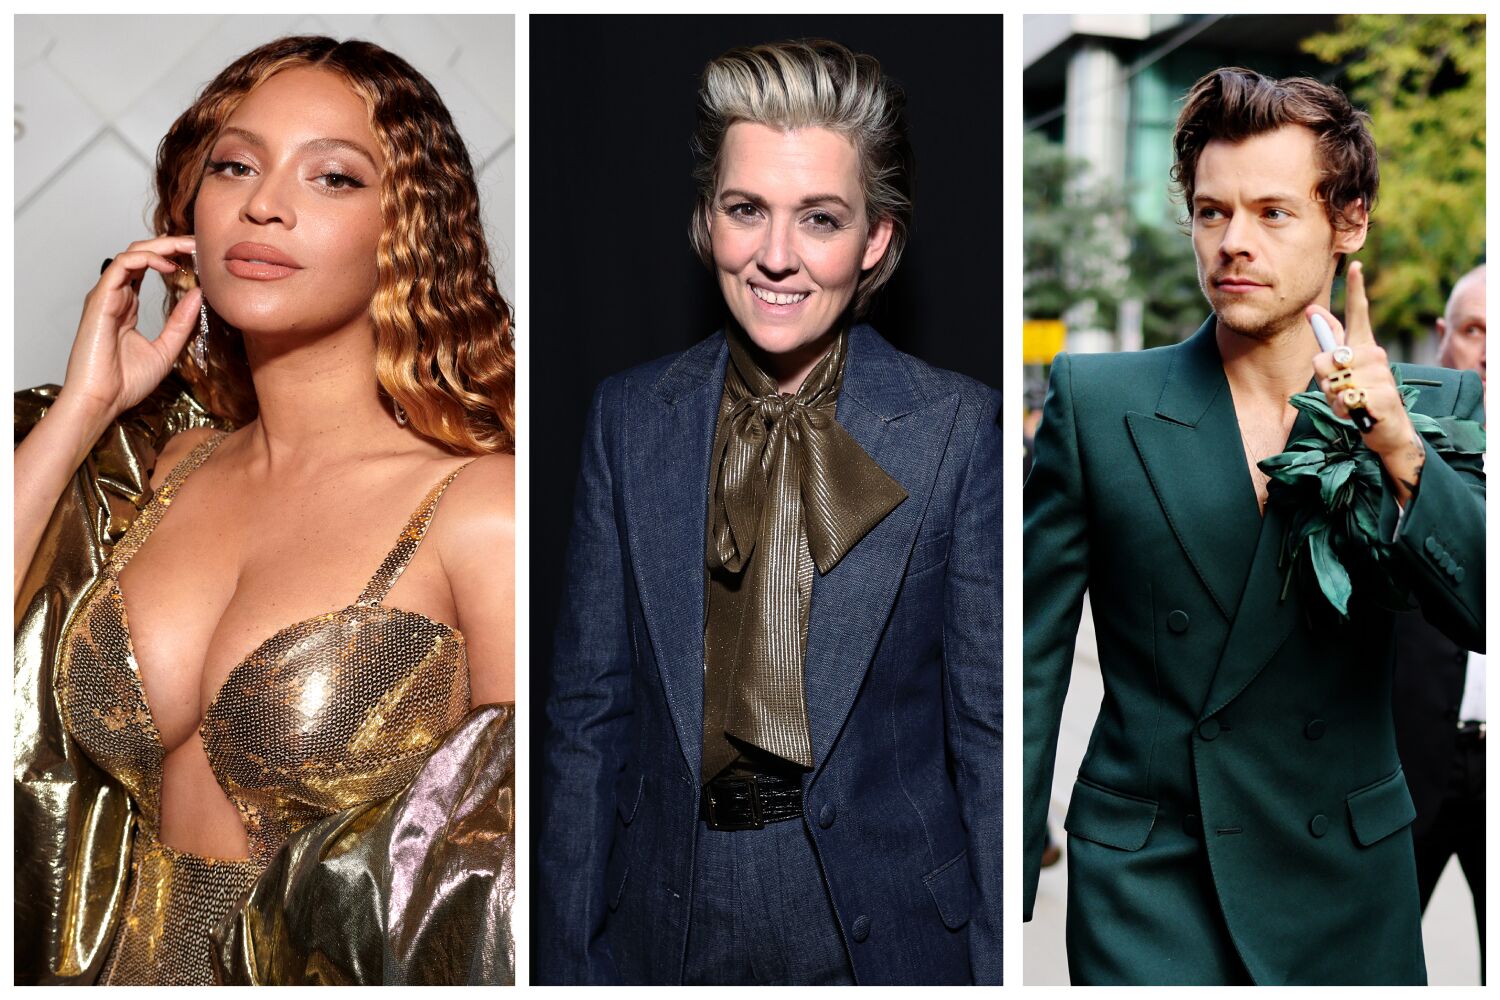 Grammys 2023 predictions: Who will win, who should win and who'll get robbed